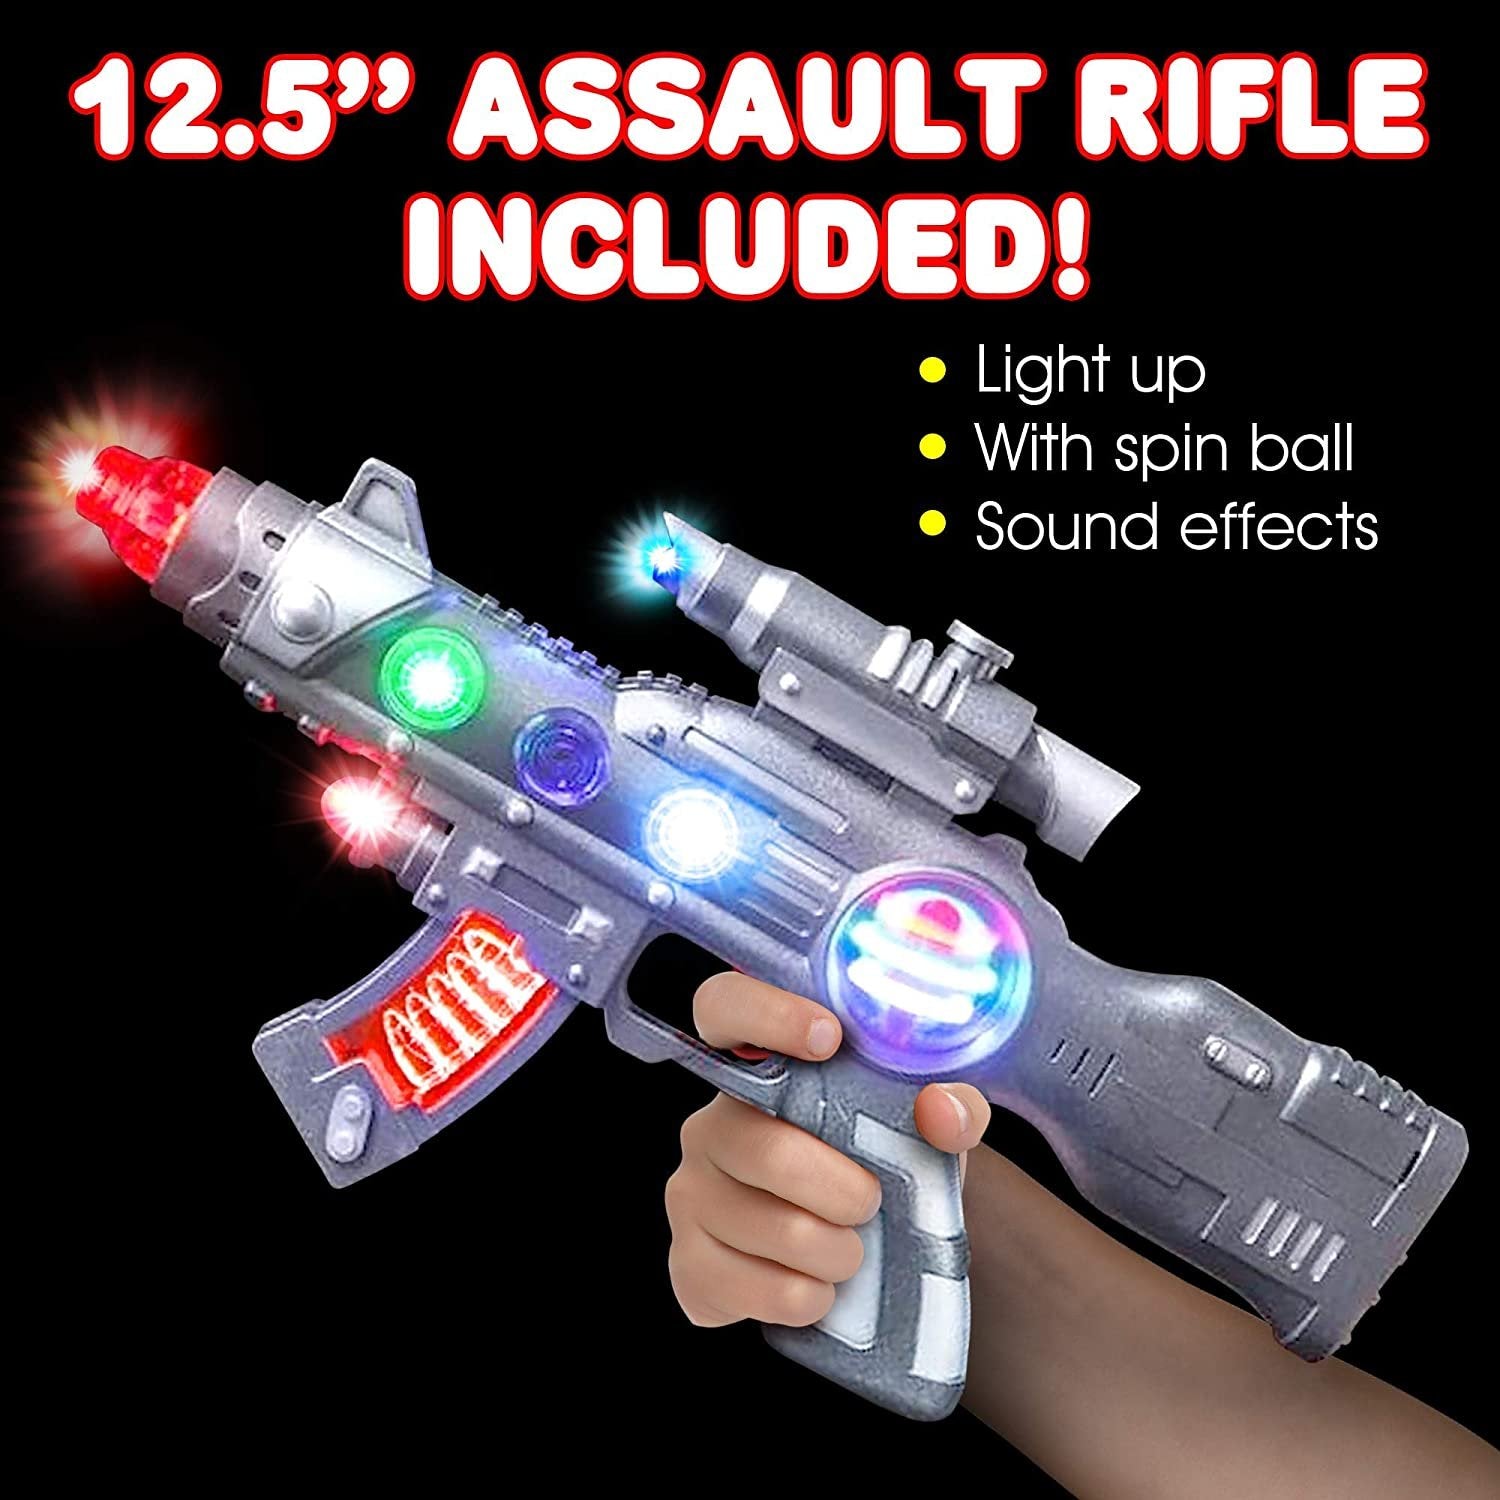 ArtCreativity Light Up Spin Ball Blaster Toy Gun, 12.5 Inch Assault Rifle with Thrilling Multicolor LEDs and Sound Effects, Batteries Included, Really Cool Play Gun for Boys and Girls, Great Gift Idea